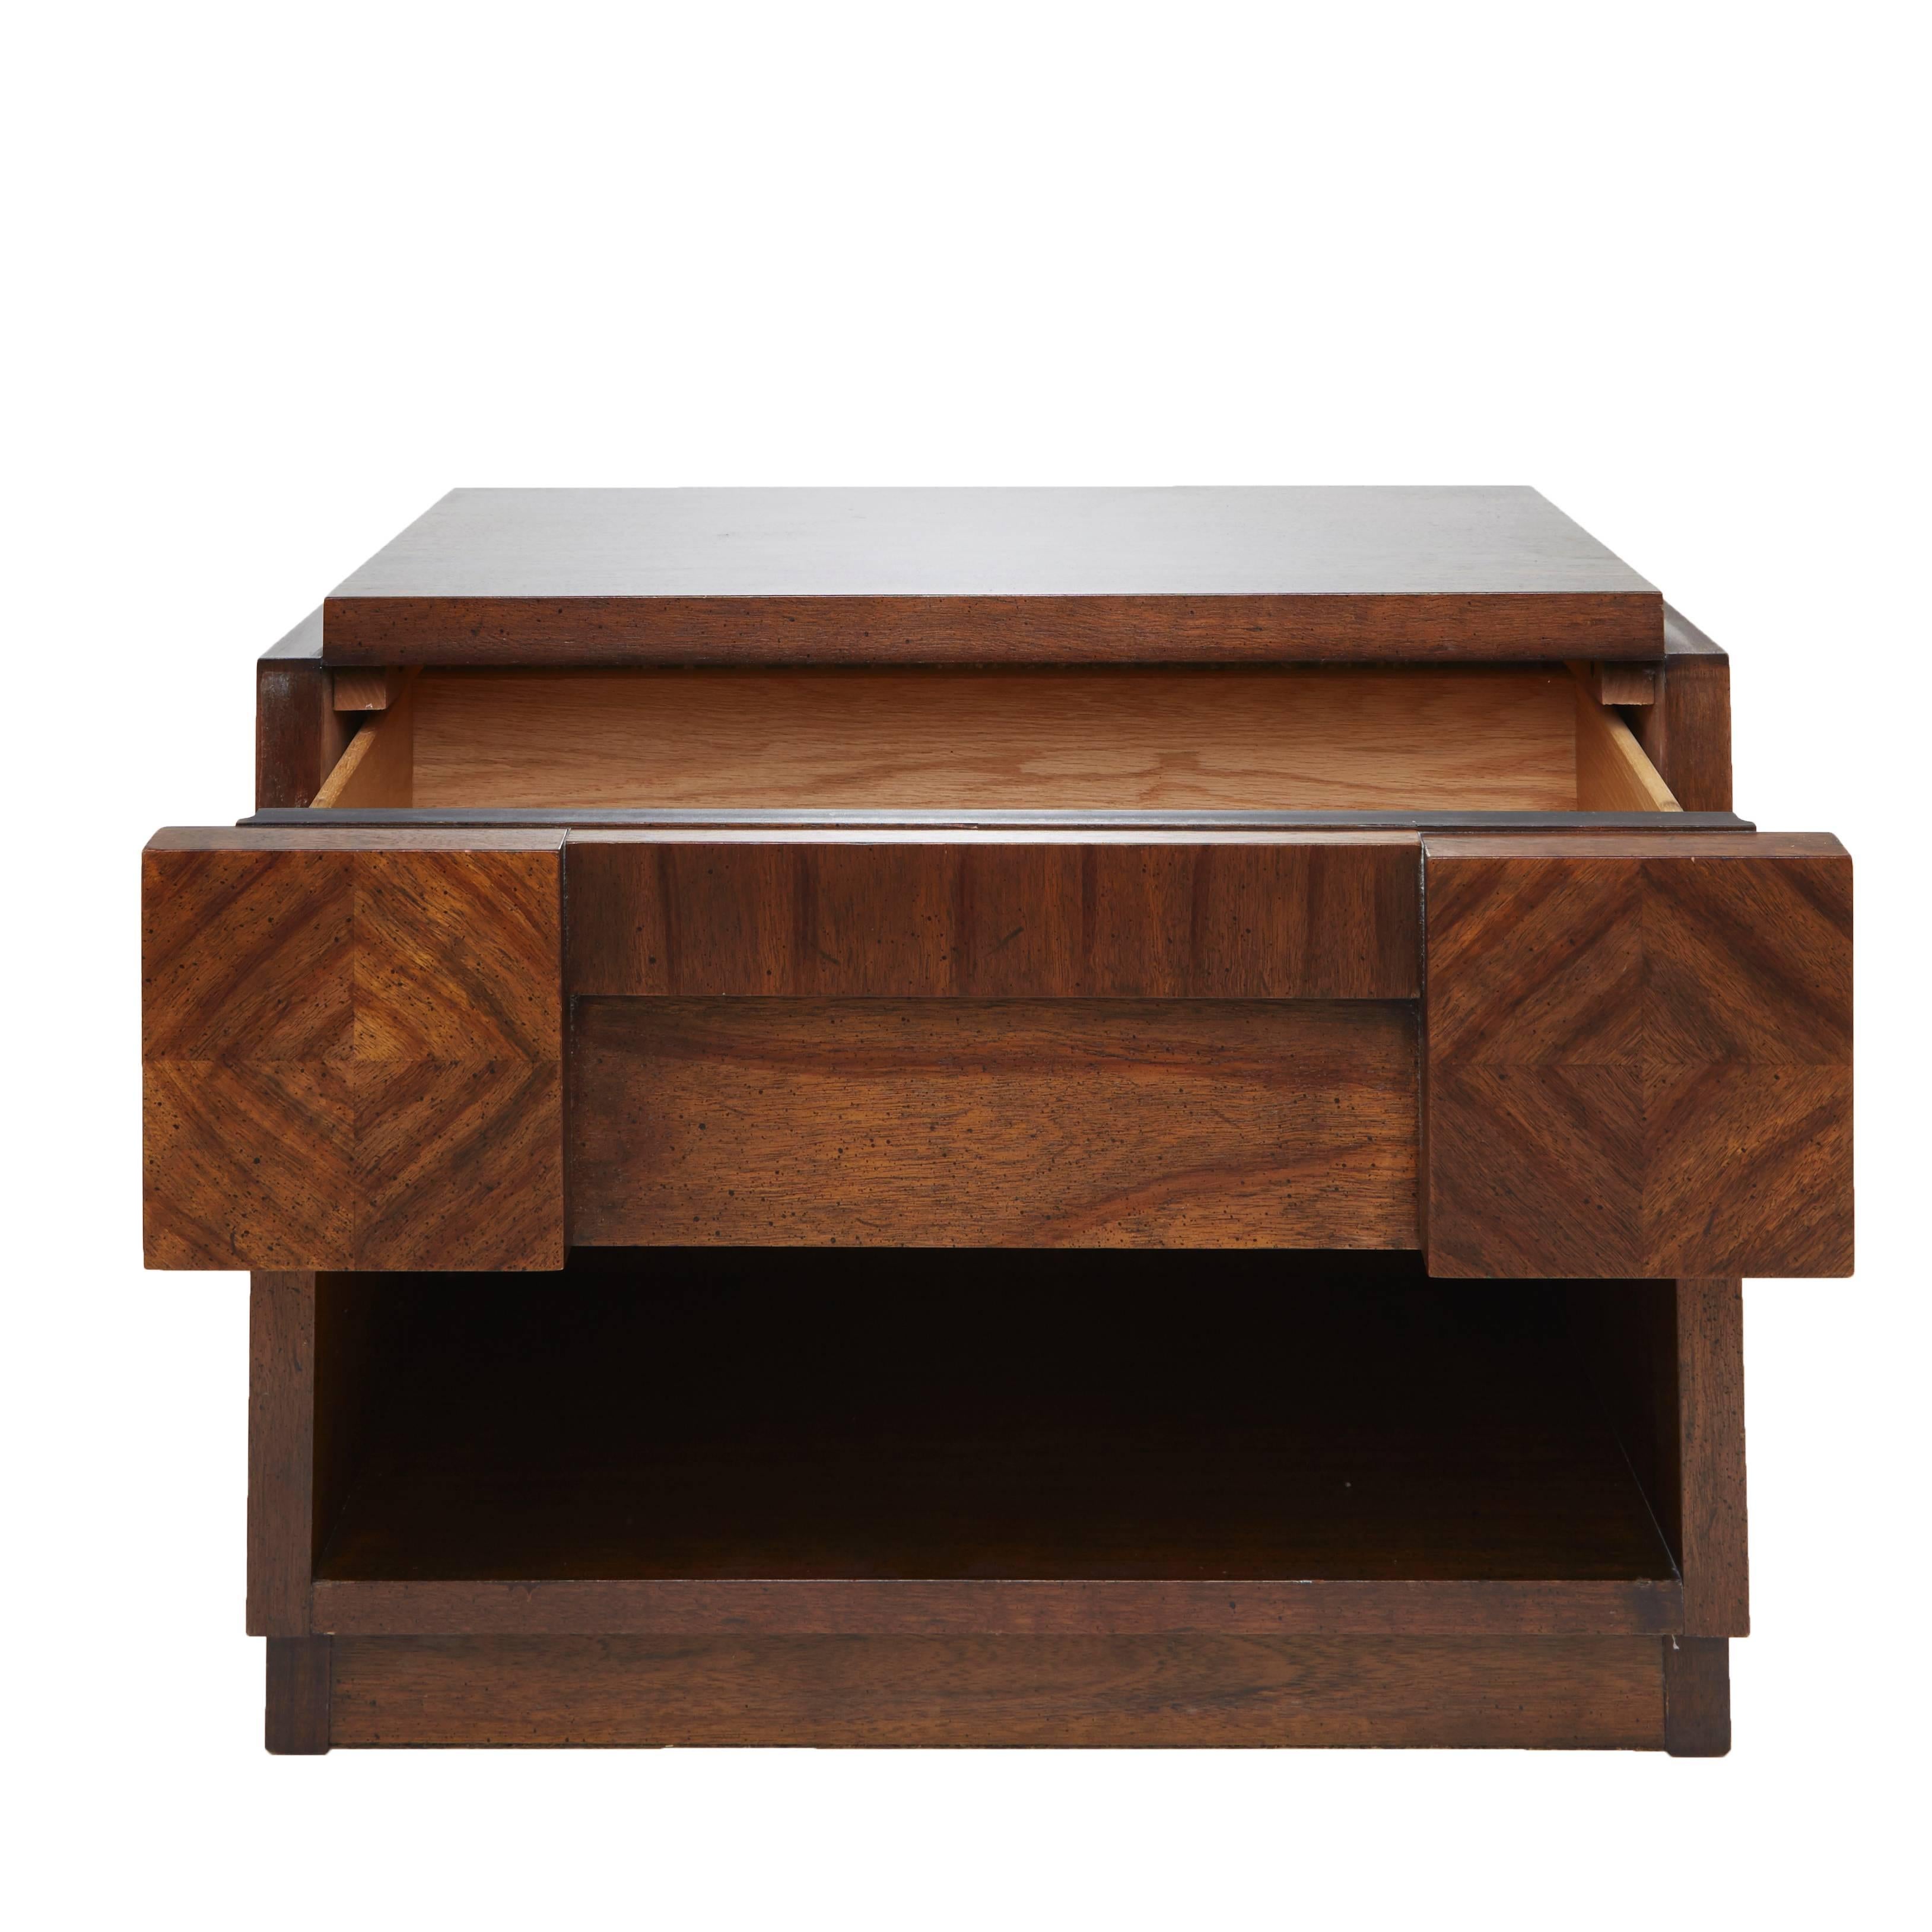 Brutalist nightstand, end table, or side table by Lane features a top drawer and a display shelf underneath. Each wood block has a beautiful, unique grain. 